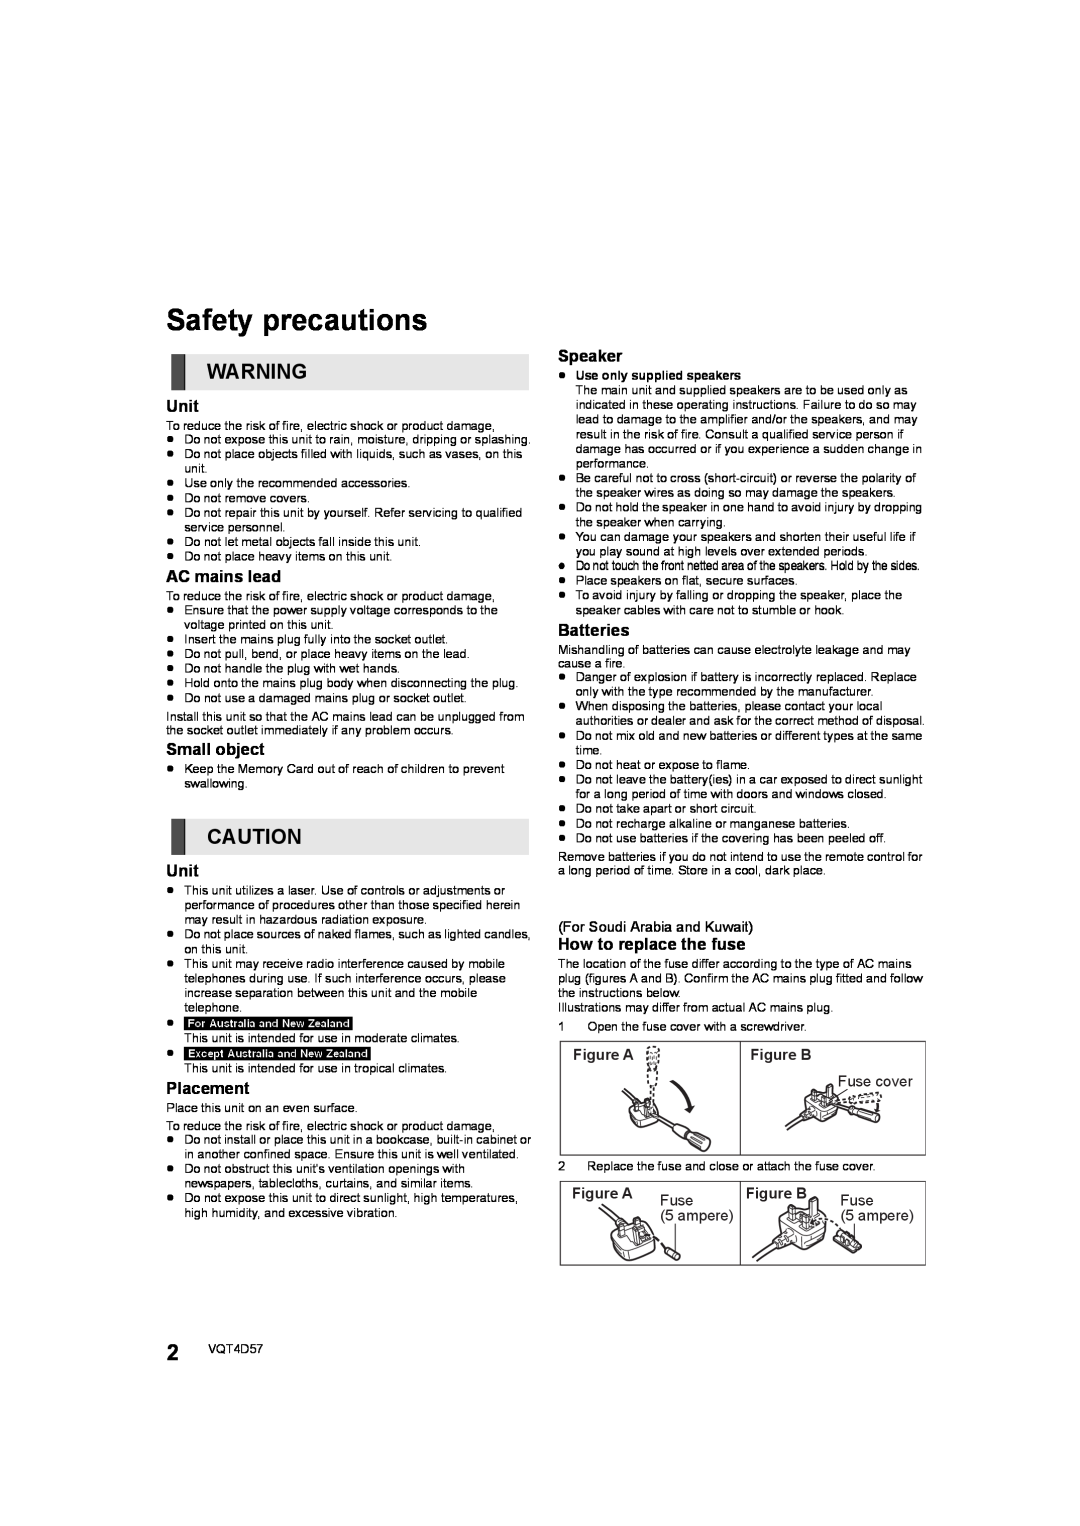 Panasonic SC-BTT190 manual Safety precautions, Figure A, Figure B, ≥Use only supplied speakers 